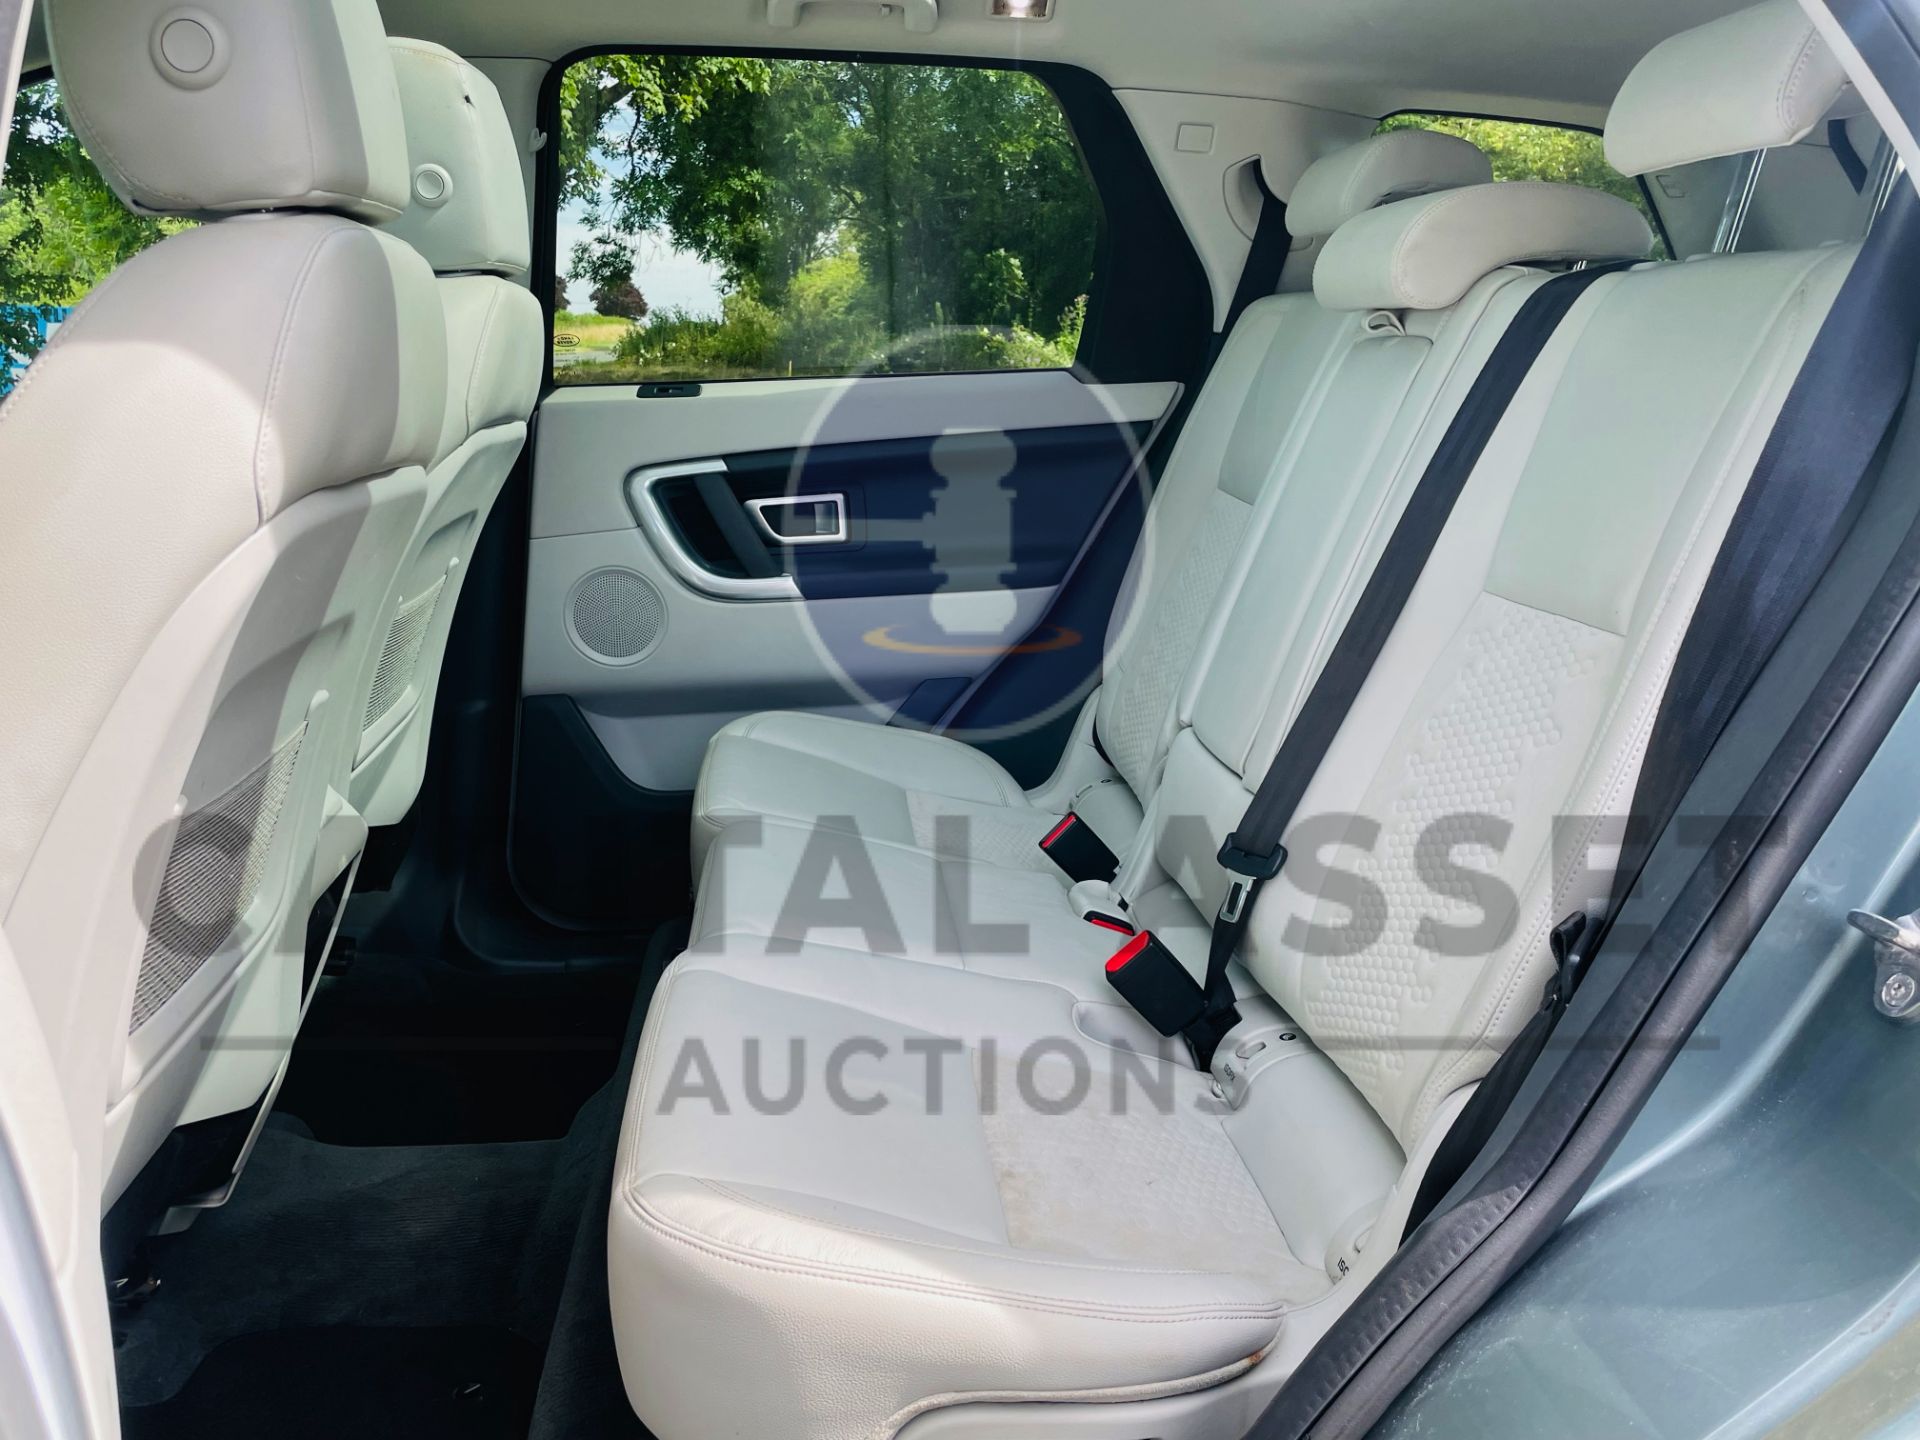 (On Sale) LAND ROVER DISCOVERY SPORT *SE TECH* SUV (2019 - EURO 6) 2.0 ED4 - STOP/START *HUGE SPEC* - Image 28 of 55